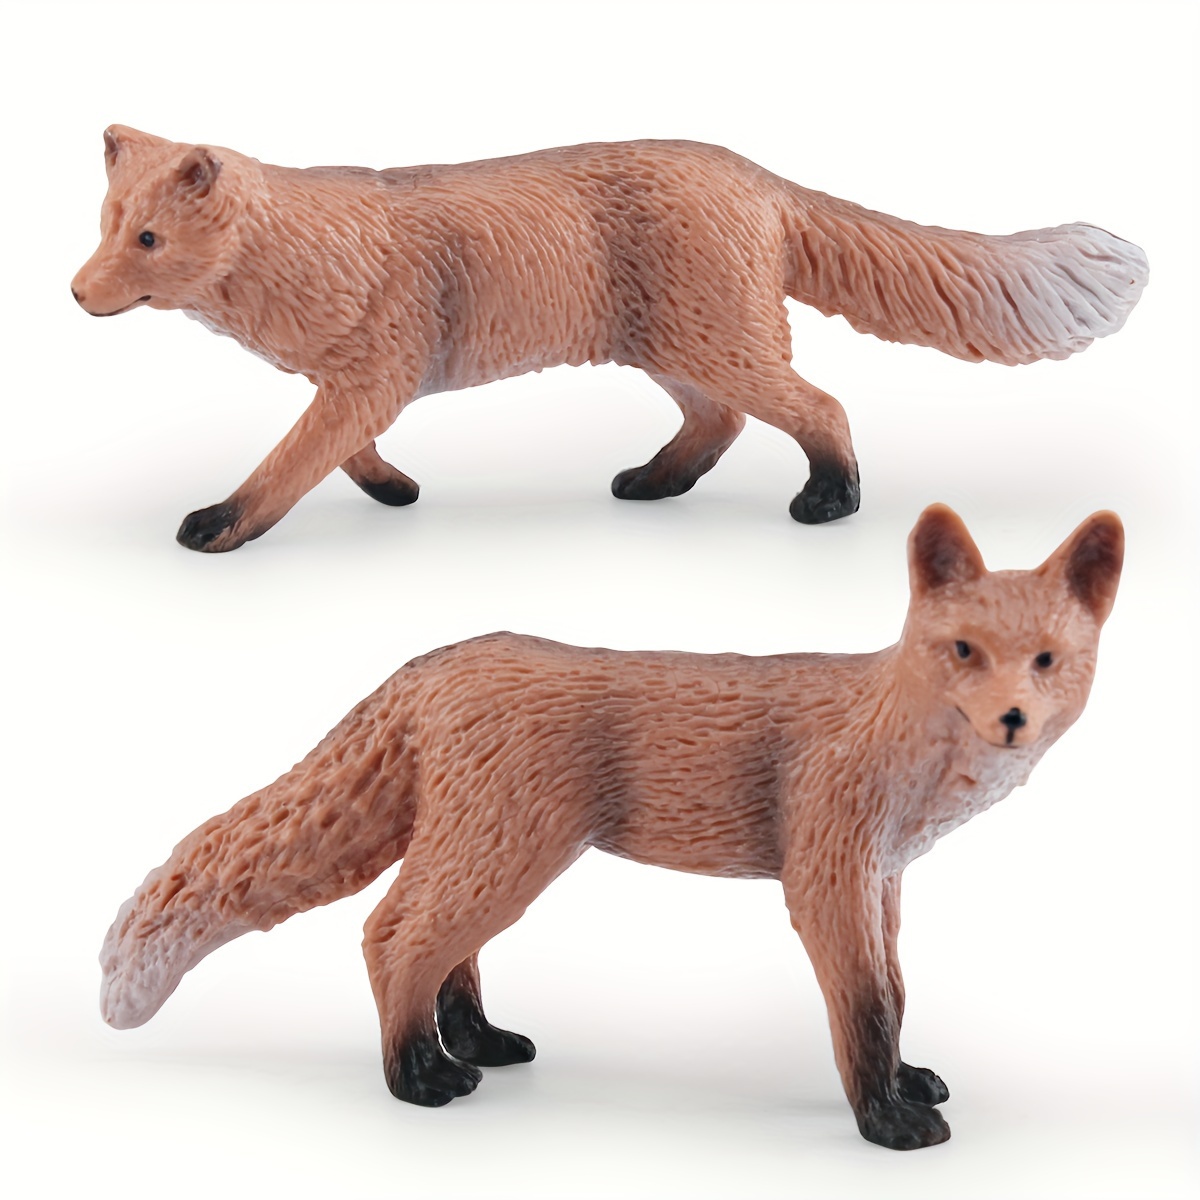 Realistic Solid Wild Animal Model, Small Red Fox Fire Fox Suit Children's  Science And Education Desktop Decoration Ornaments Toys